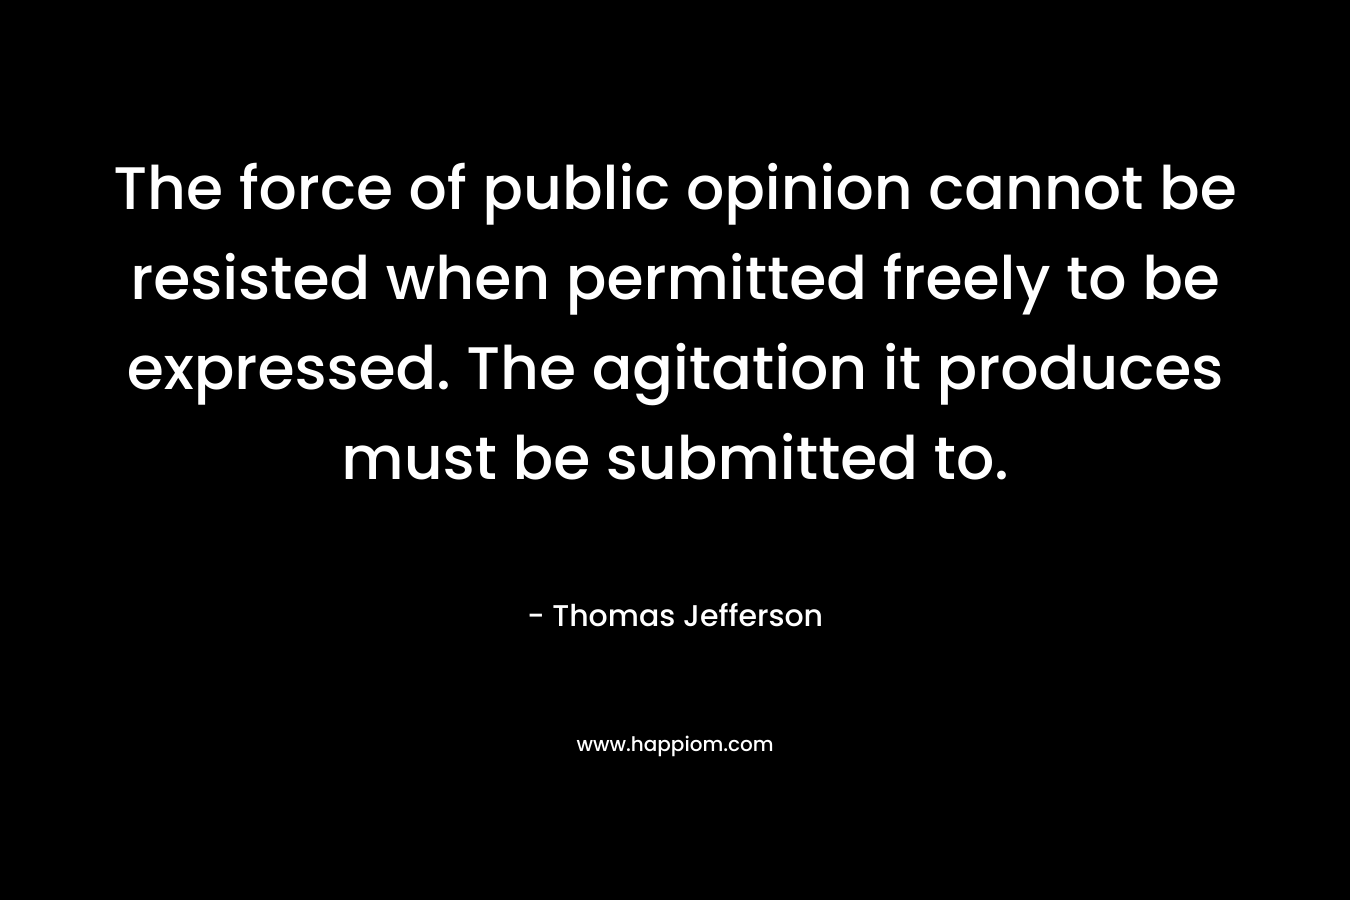 The force of public opinion cannot be resisted when permitted freely to be expressed. The agitation it produces must be submitted to.